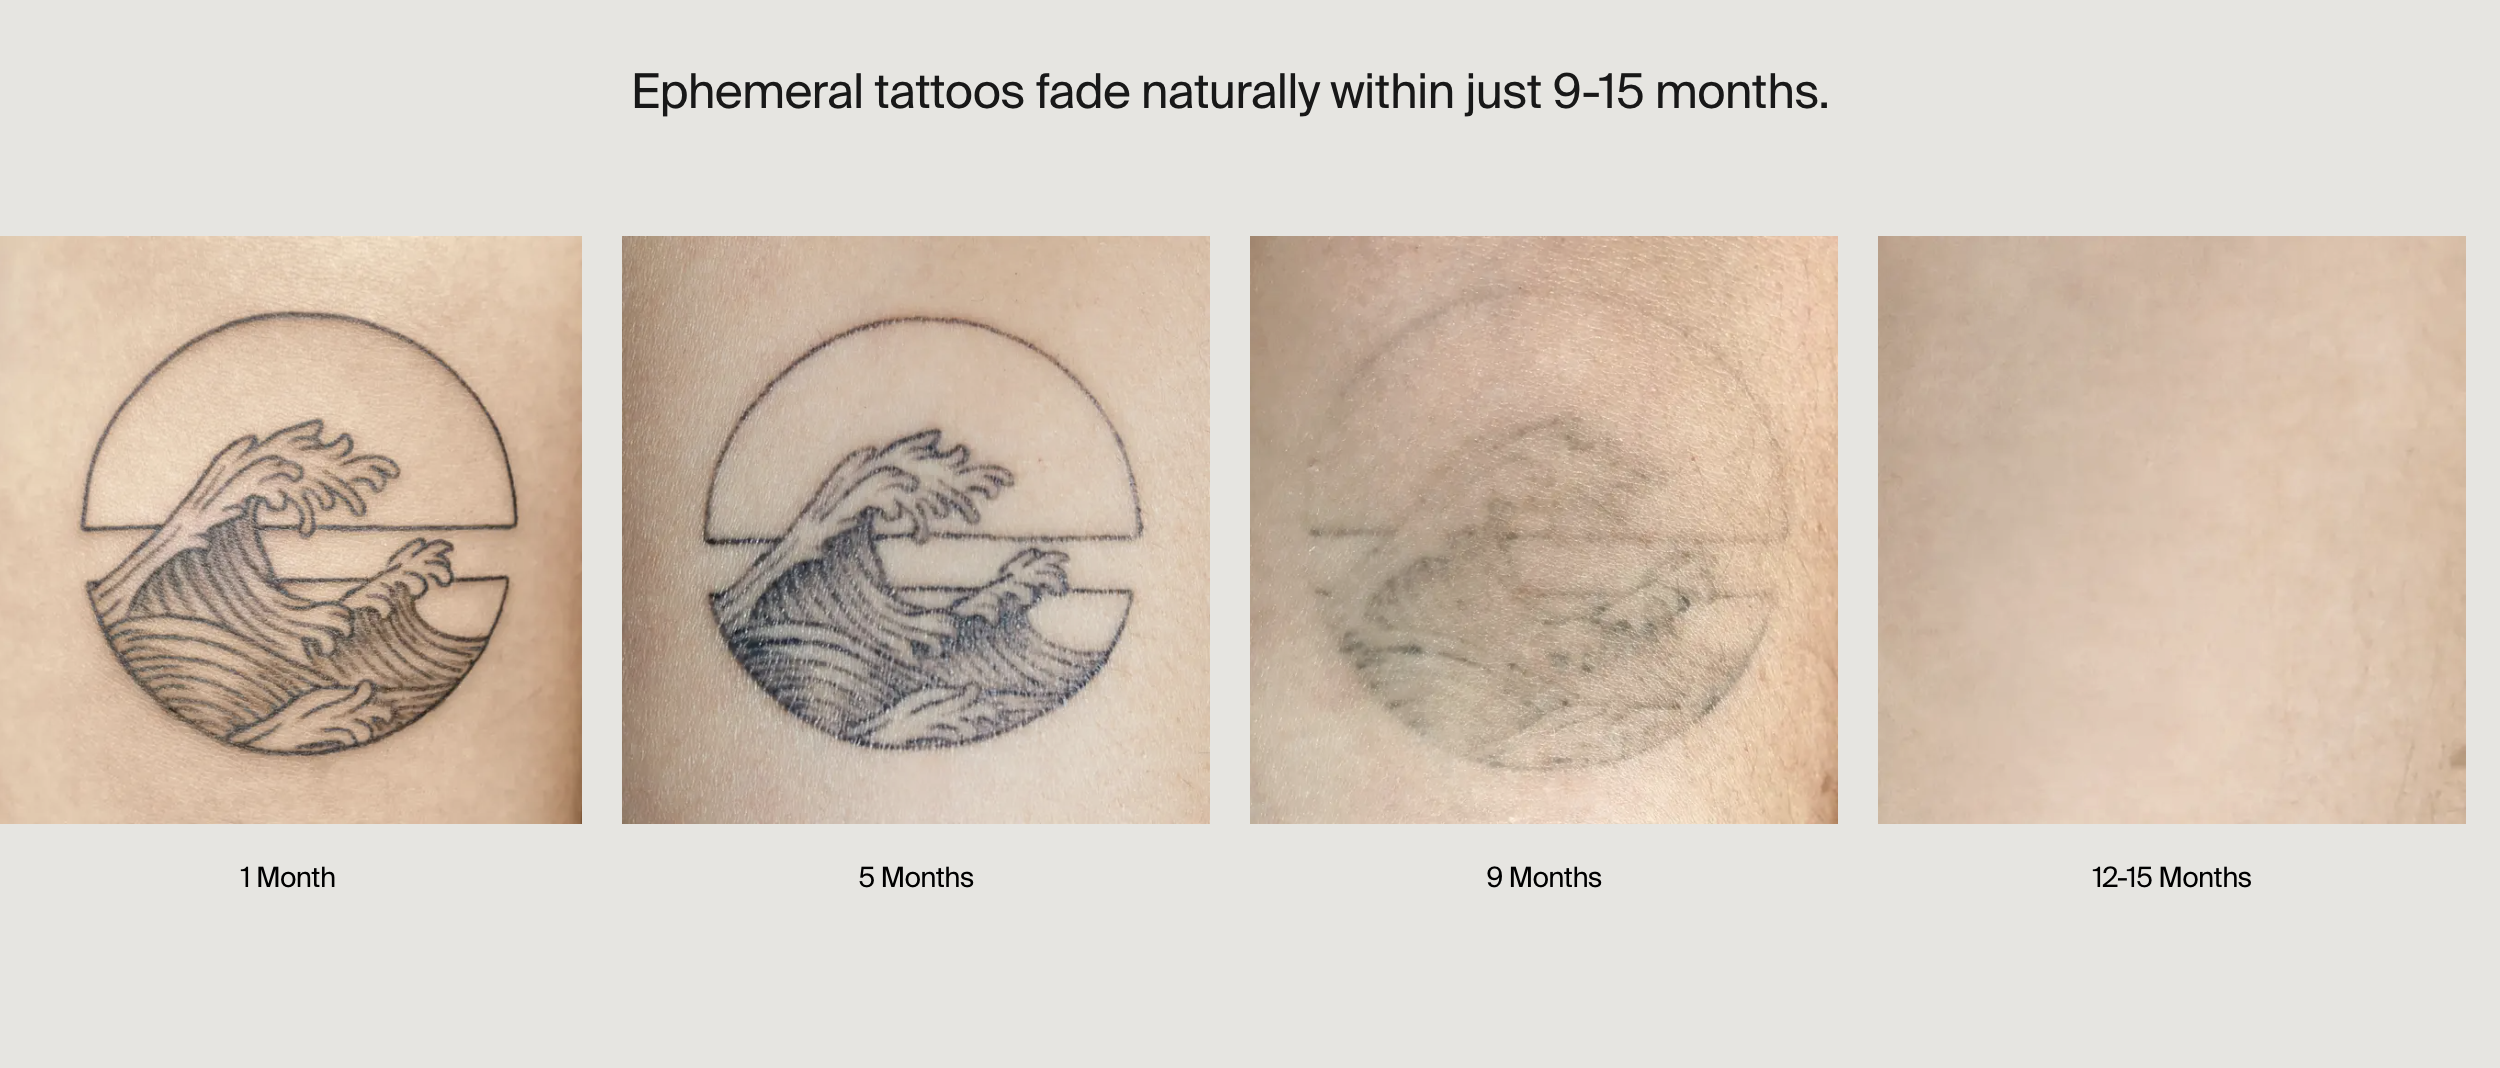 a tattoo design fading over time